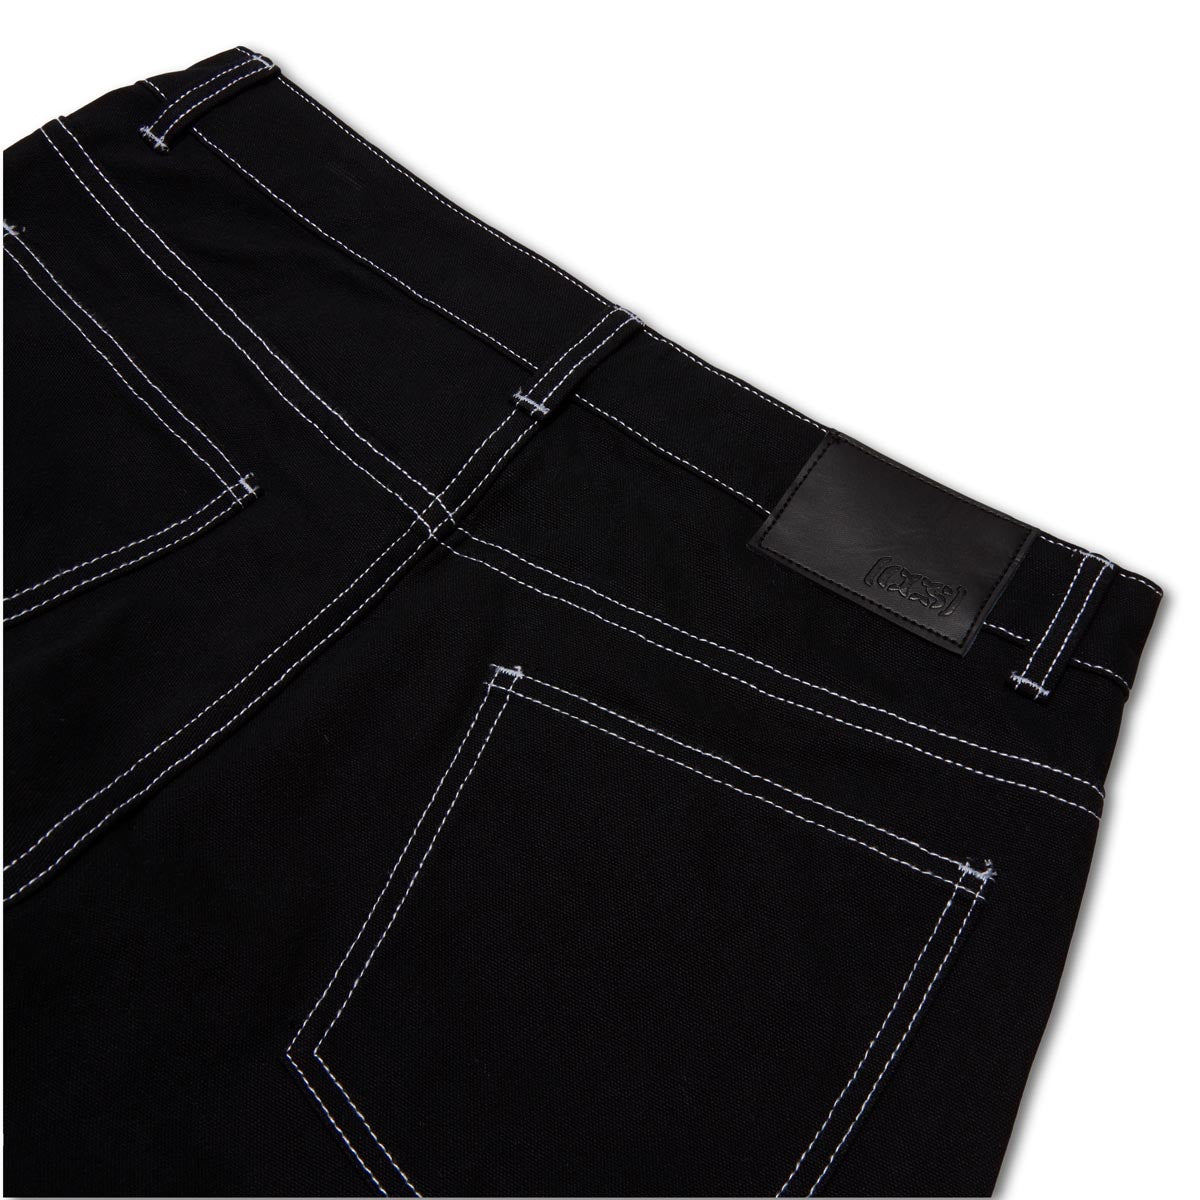 CCS Double Knee Original Relaxed Canvas Pants - Black/White image 6